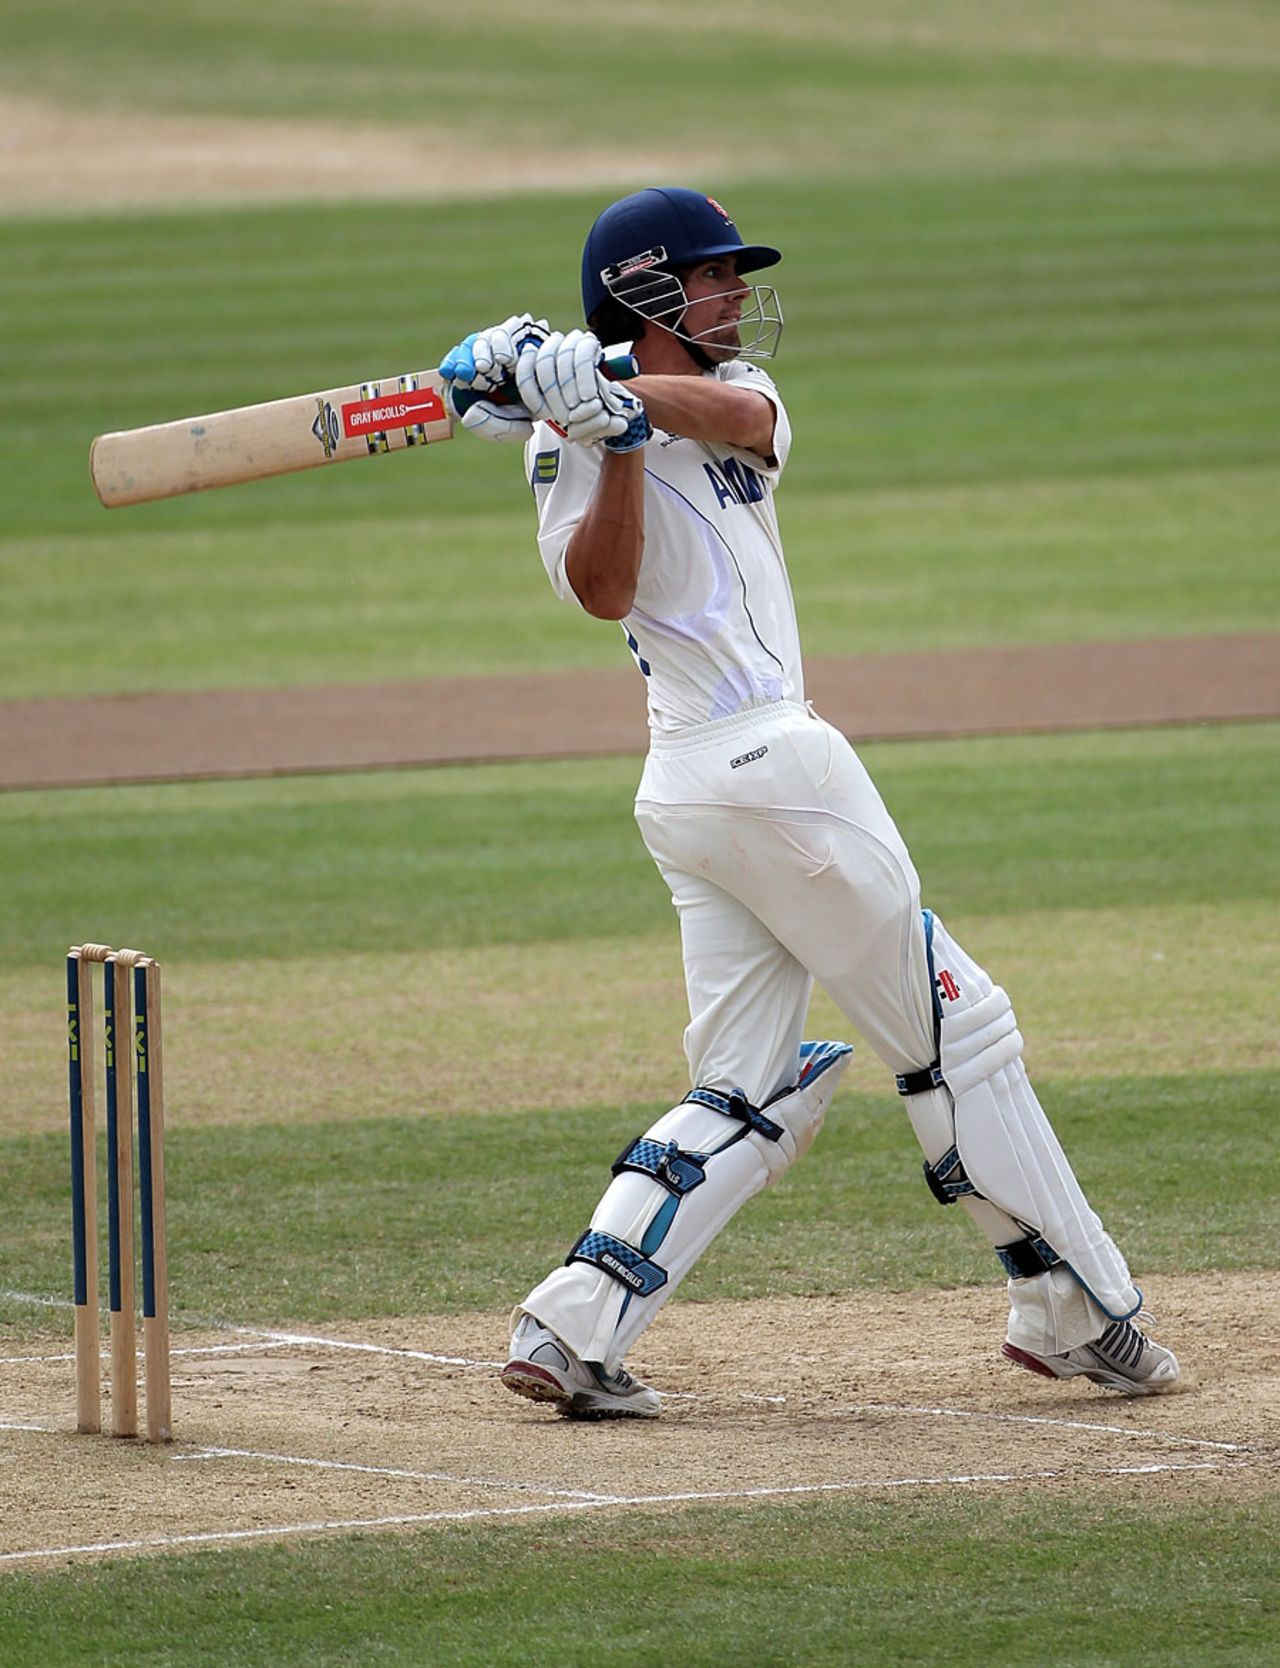 Alastair Cook hooks on his way to a century for Essex, Essex v Yorkshire, County Championship Division One, Chelmsford, July 23, 2010